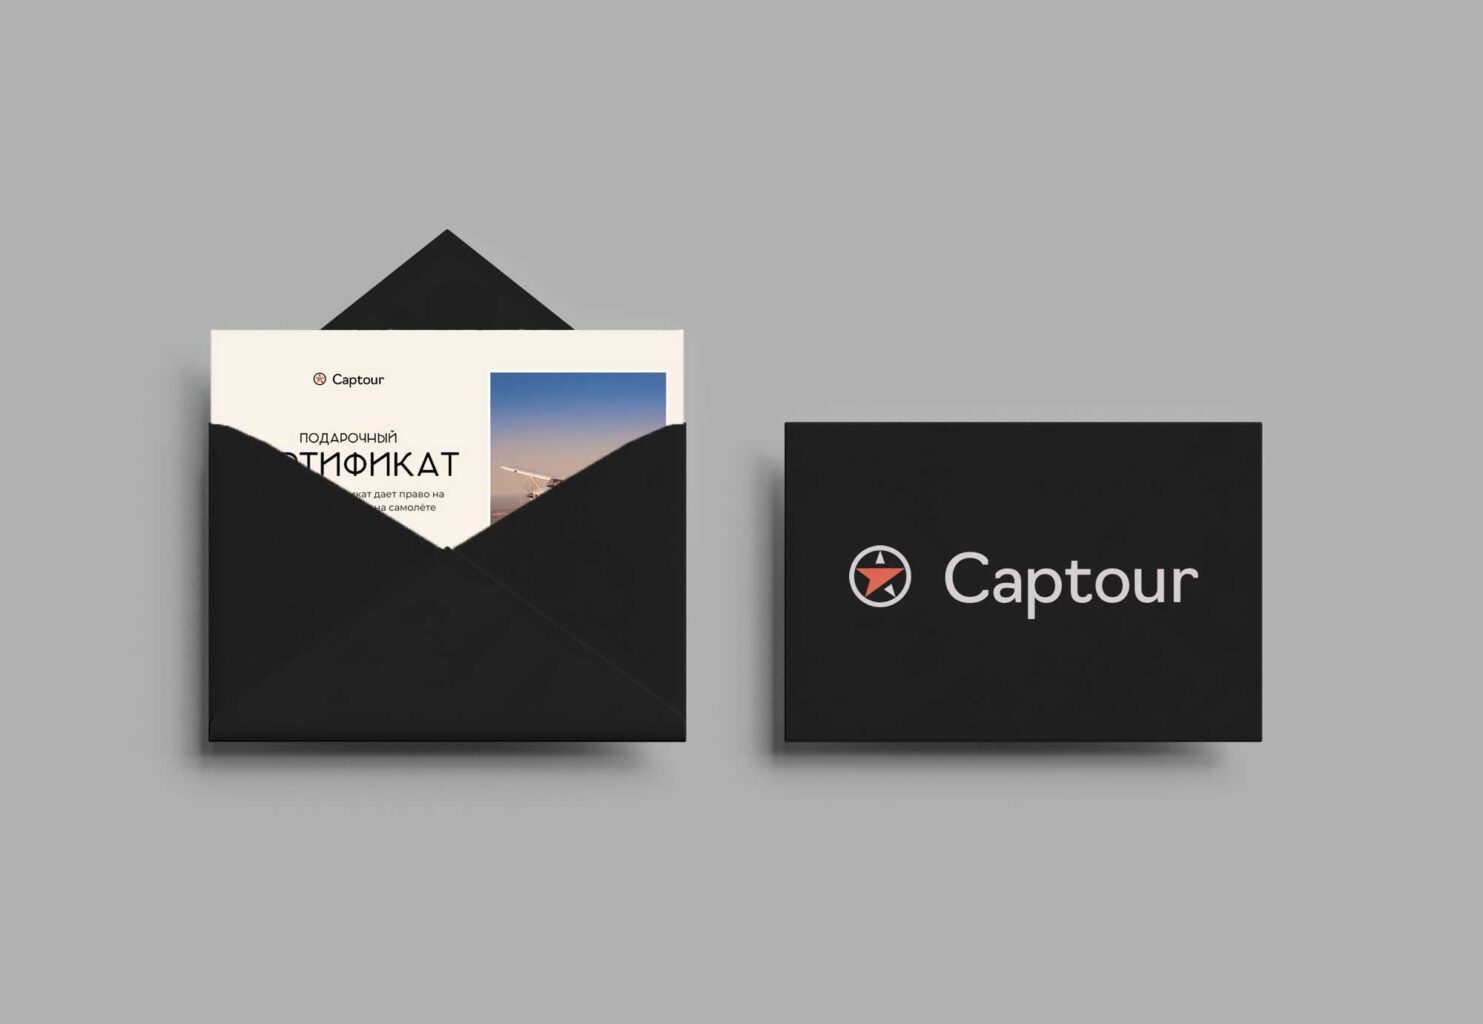 Personal gift certificate from Captour